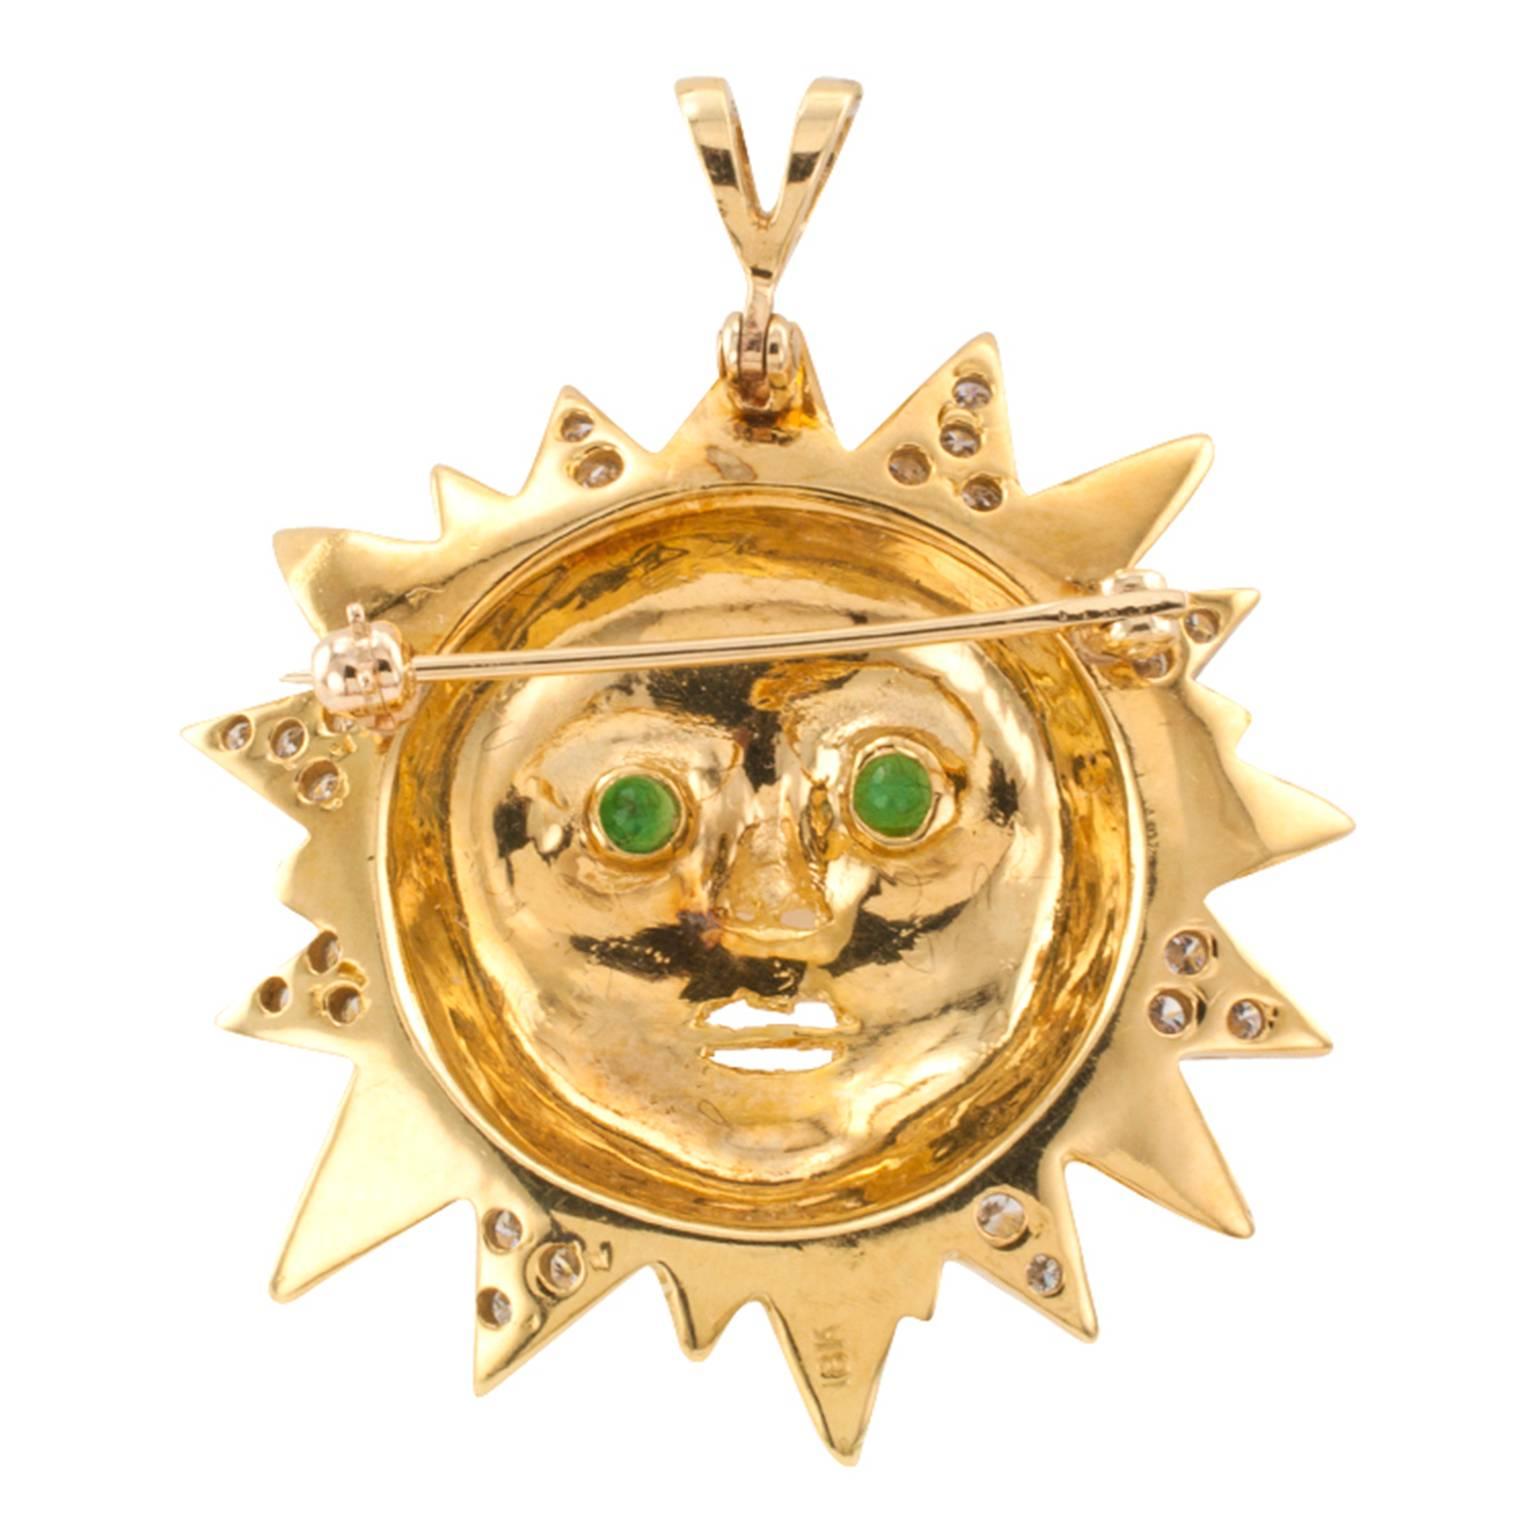 Sunshine Estate 18 Karat Gold and Diamond Brooch Pendant

No better way to tell someone special that... You are the Sunshine of My life! Than with a gift of the sun itself shining, and smiling, and glittering, and looking at the world with bright